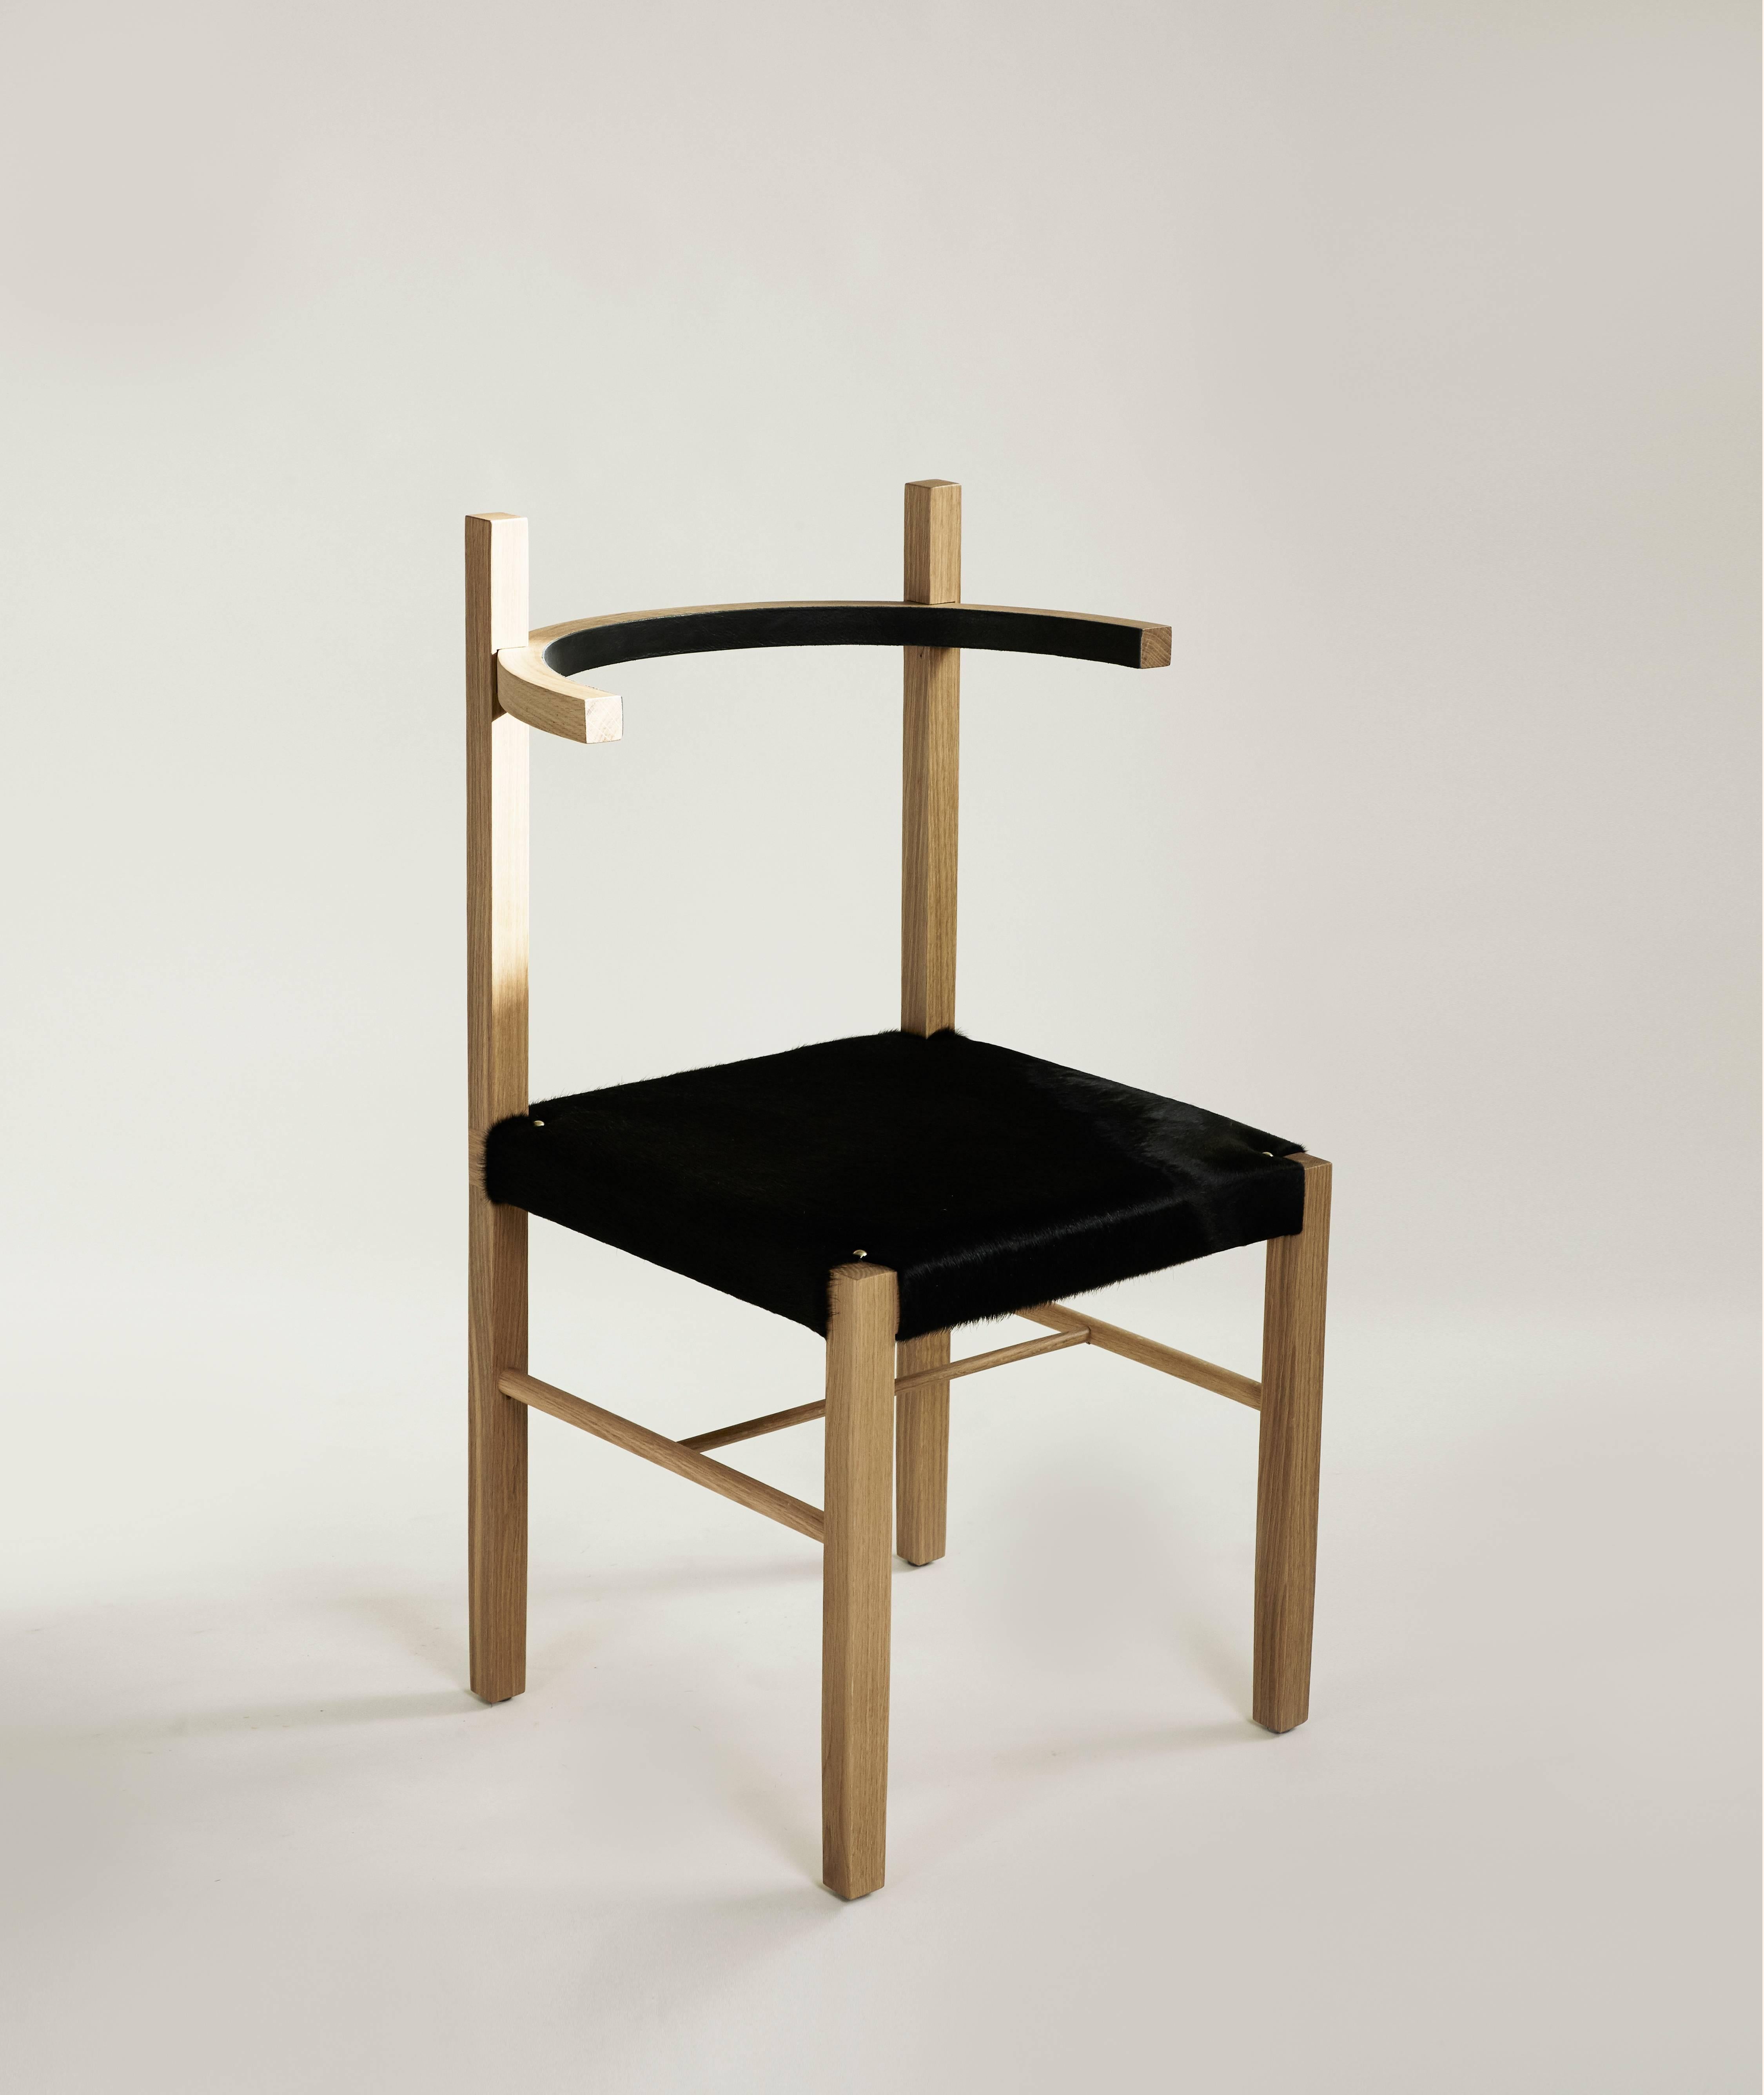 The Soren chair celebrates the beauty of its materials, wood and leather, assembling them to create a bold and well-proportioned chair. The chair’s backrest is a minimal horizontal arc with rich ebony leather trim on its inner face. The arc rests